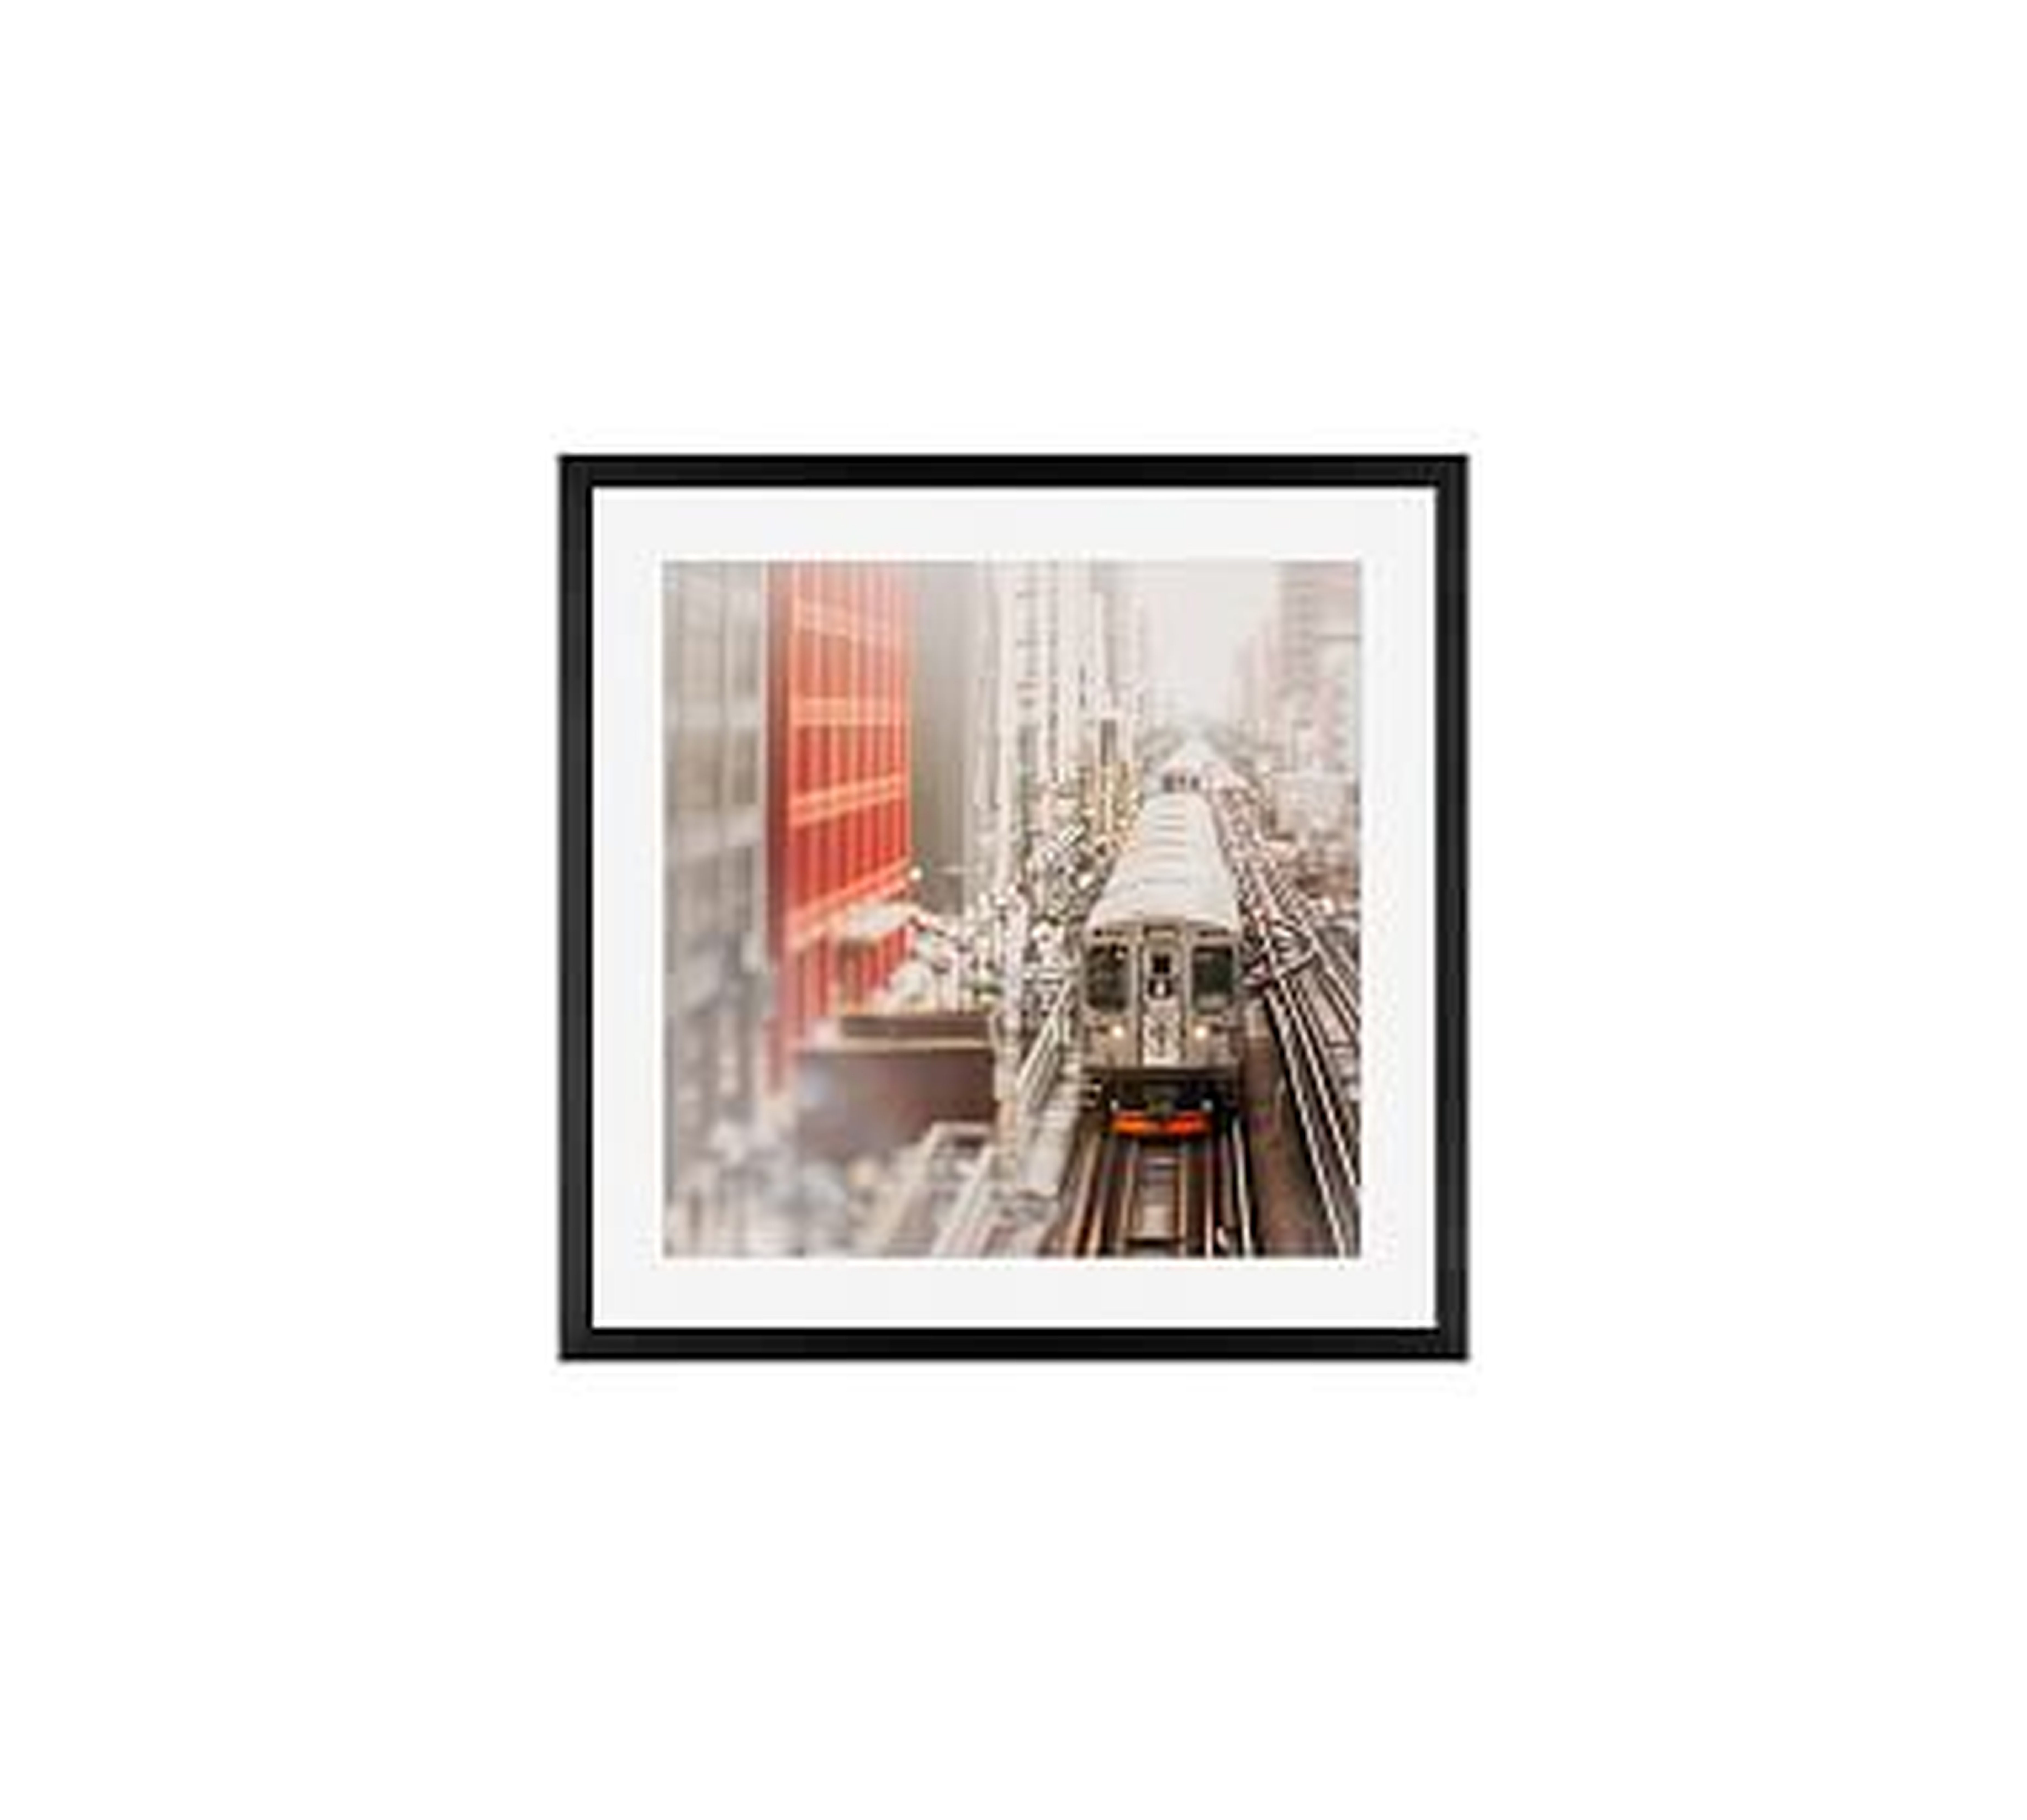 Around the Loop Framed Print By Tracey Capone, 18x18", Wood Gallery Frame, Black, Mat - Pottery Barn